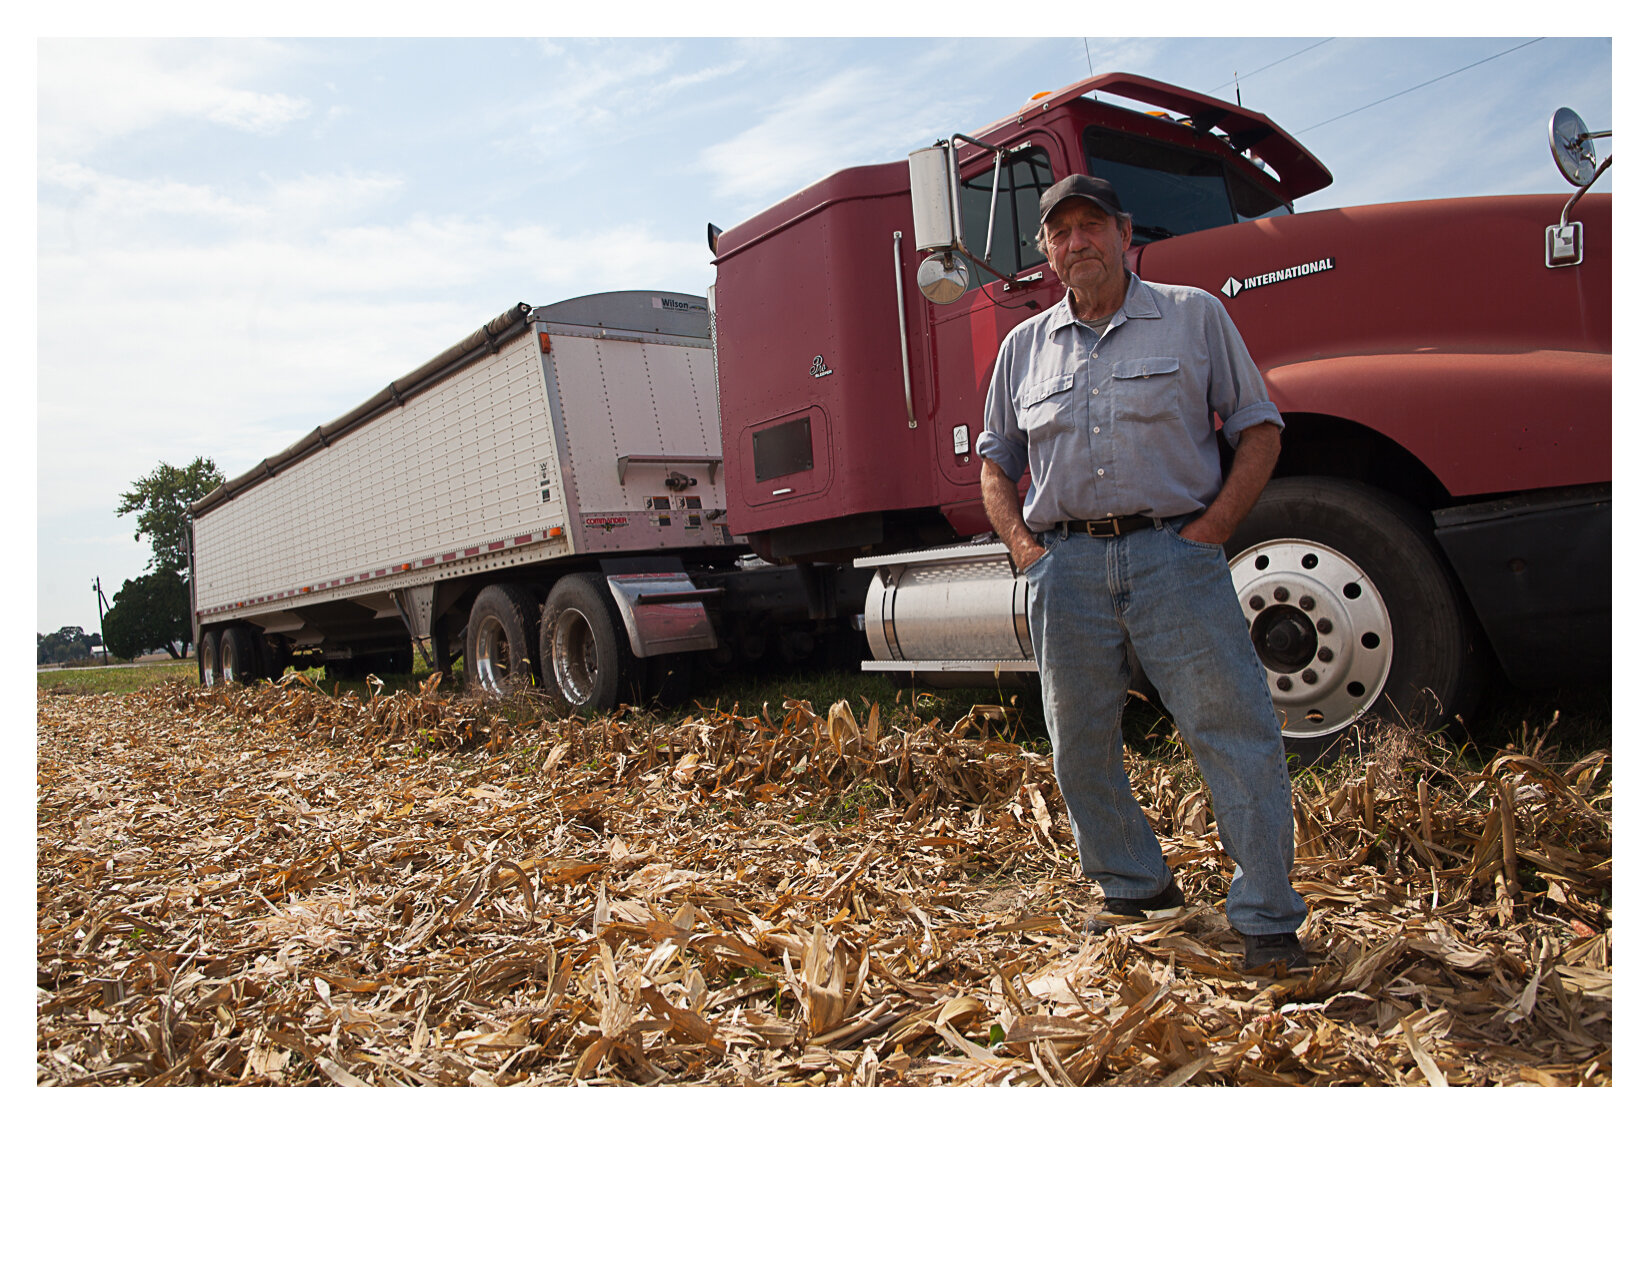 Truck Driver waiting for Harvested Corn, Urbana, OH